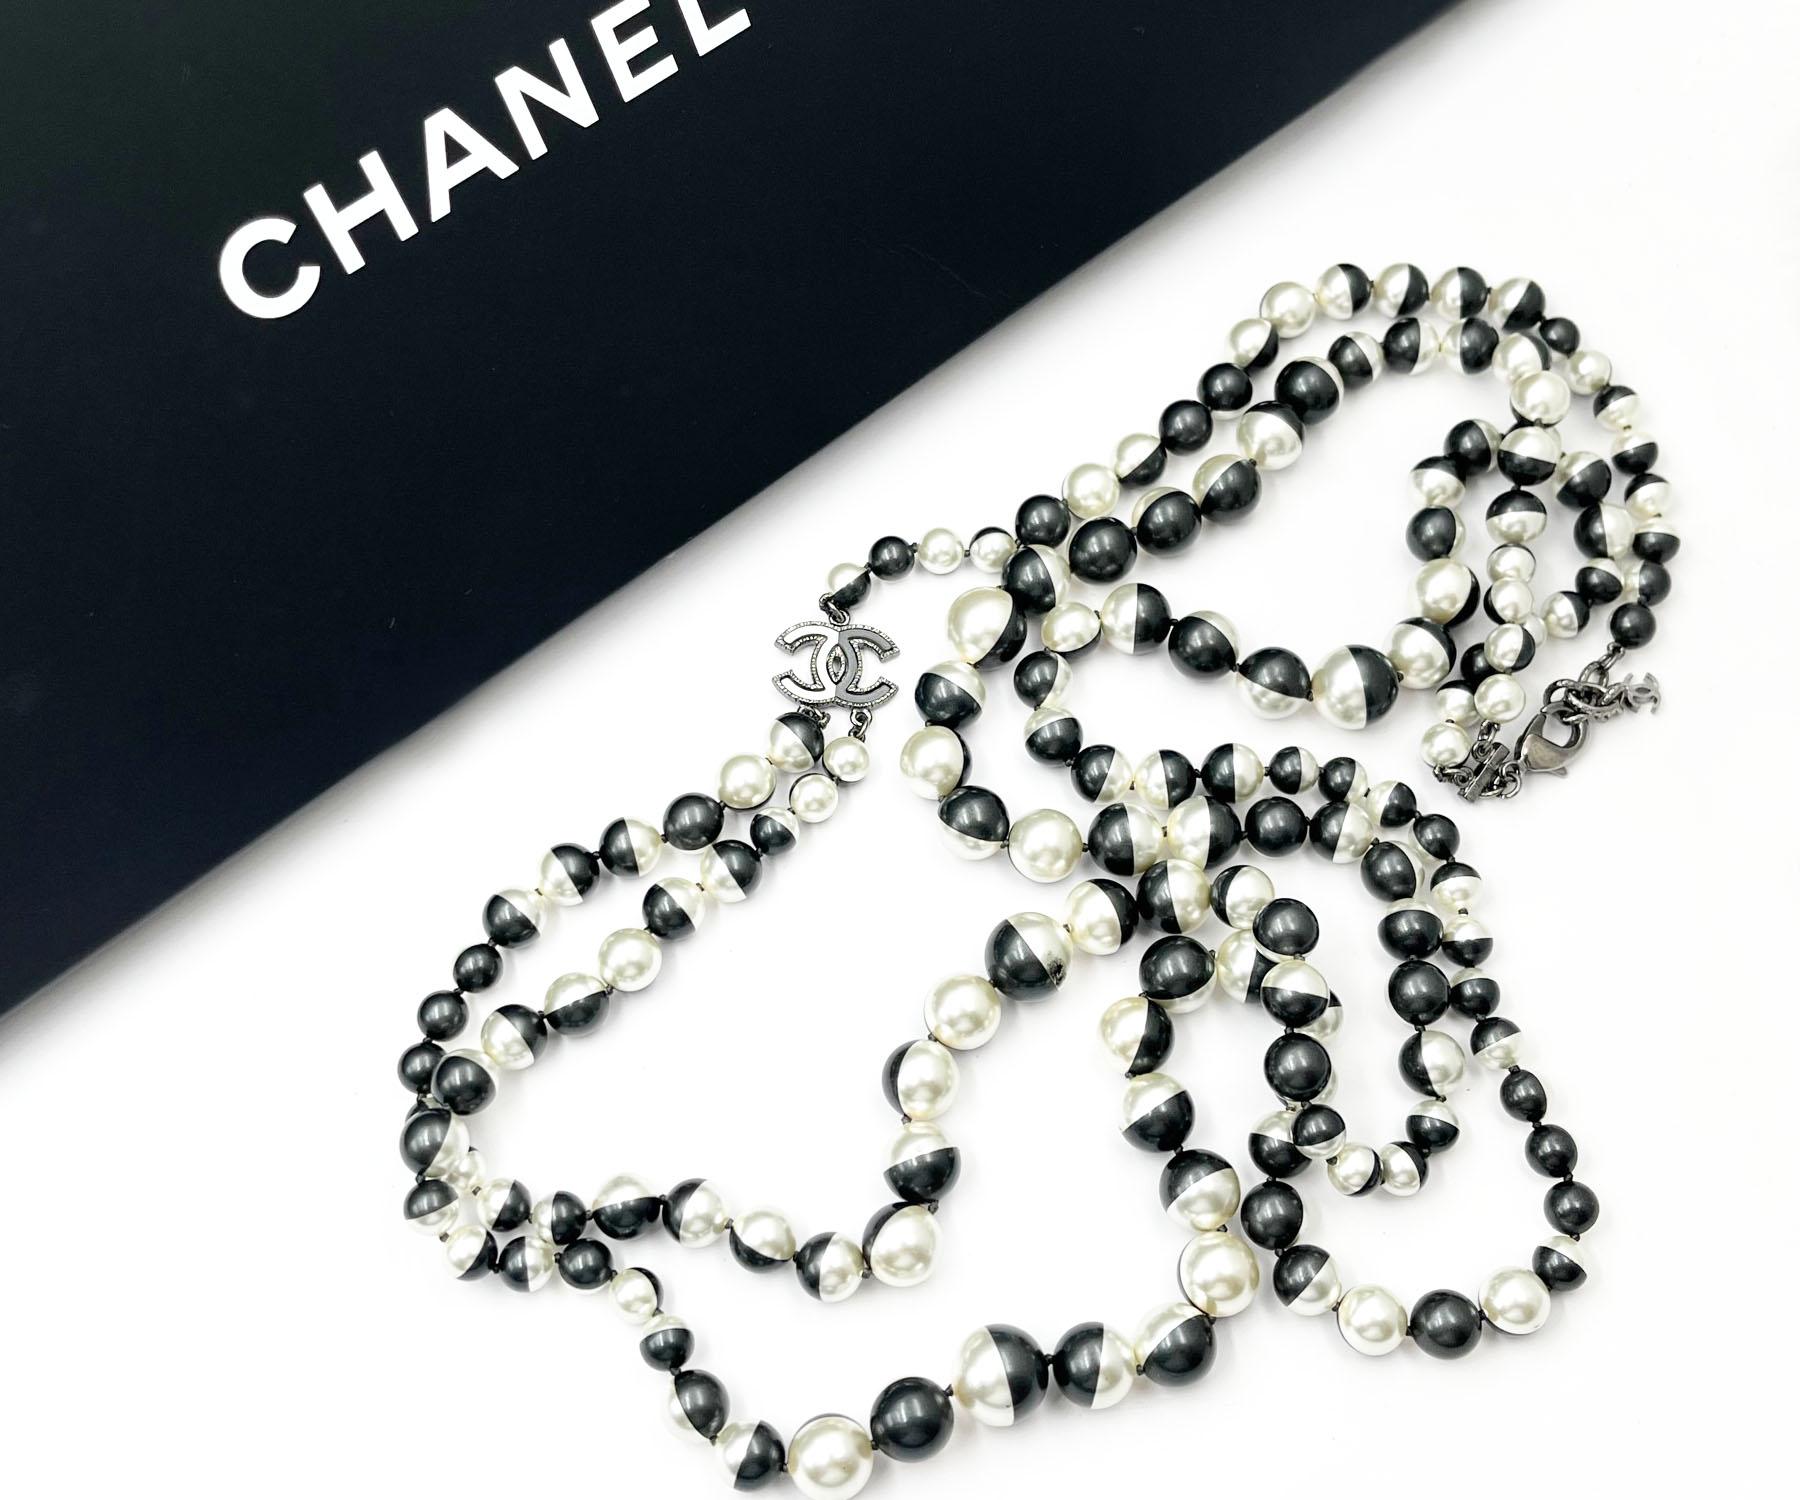 Chanel Unique Black White Half Half 2 Strand Pearl Long Necklace

* Marked 16
* Made in France
*Comes with the original box and pouch

-It is approximately 42